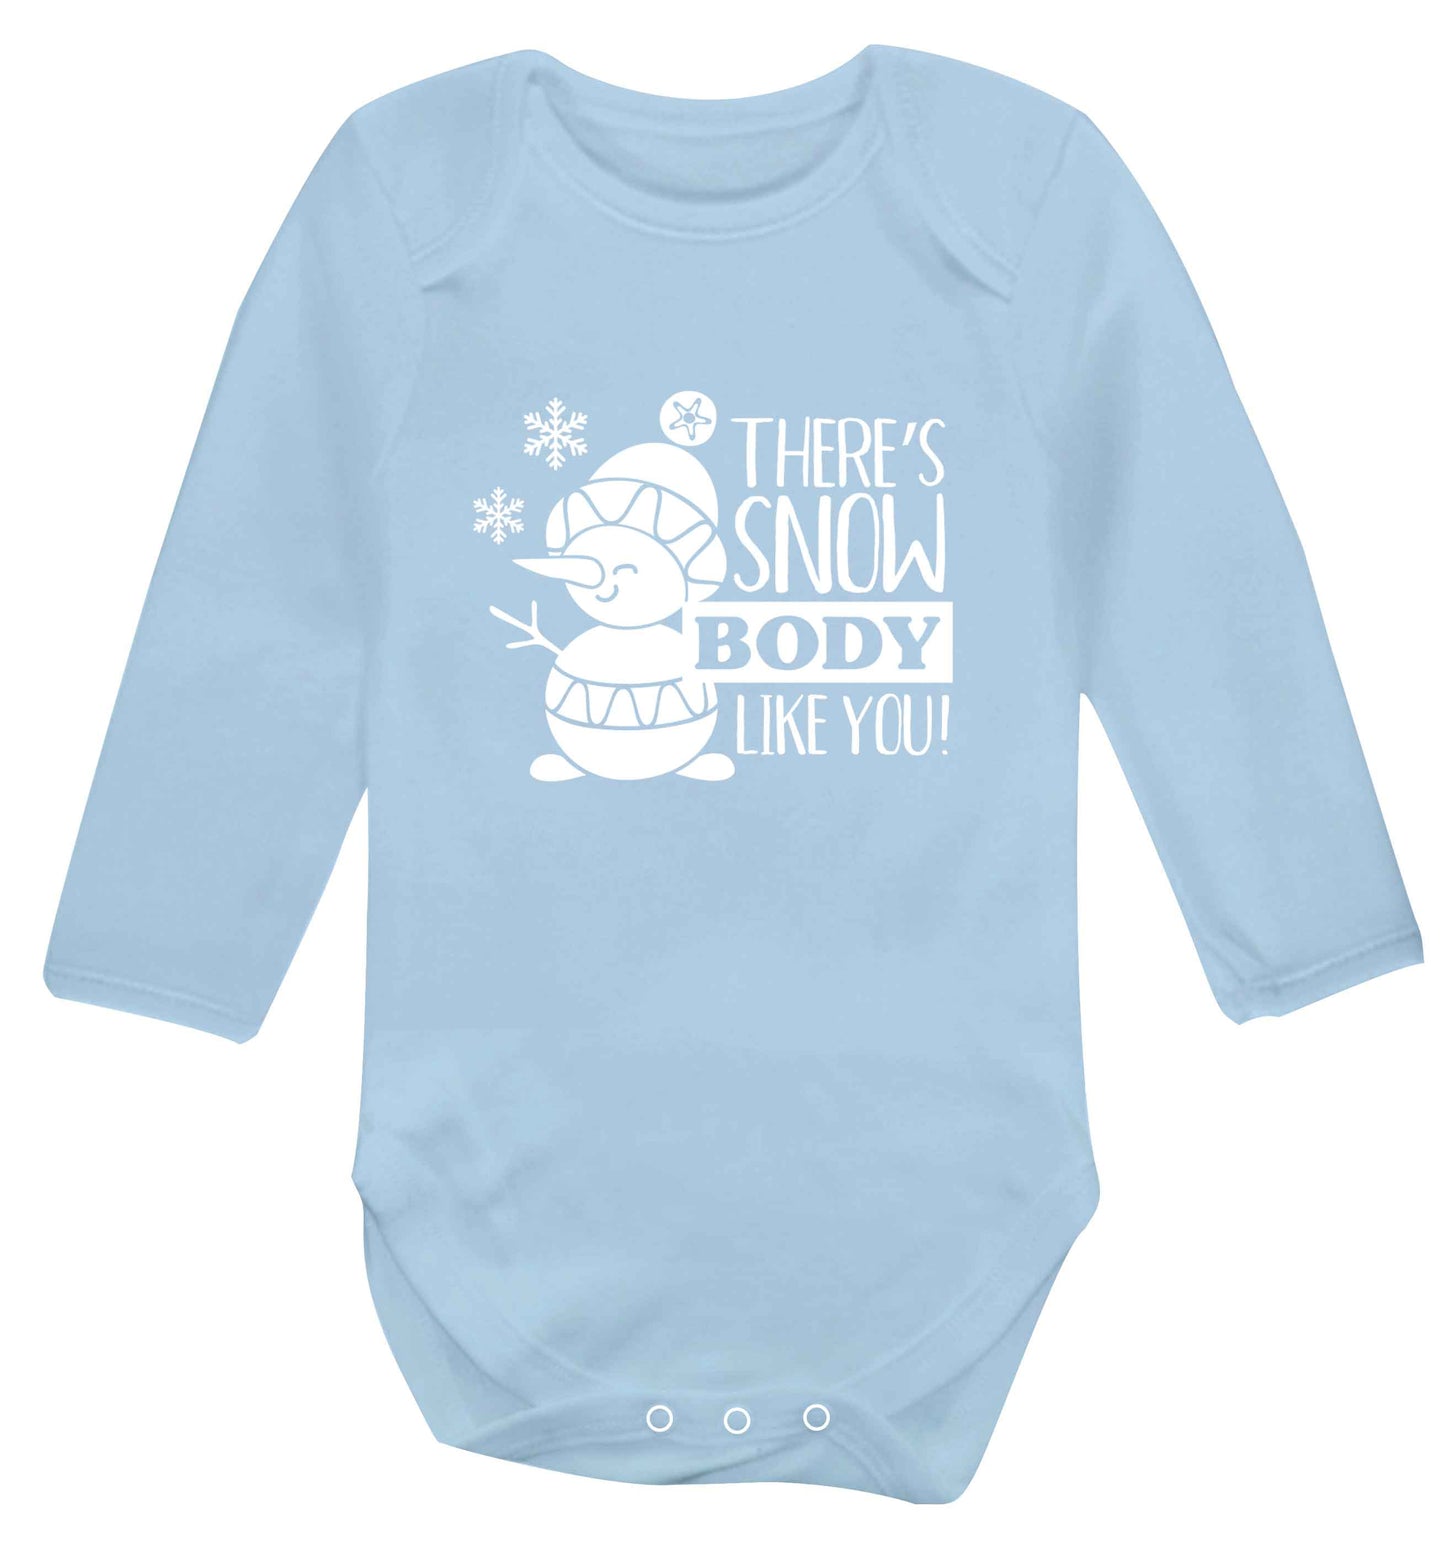 There's snow body like you baby vest long sleeved pale blue 6-12 months